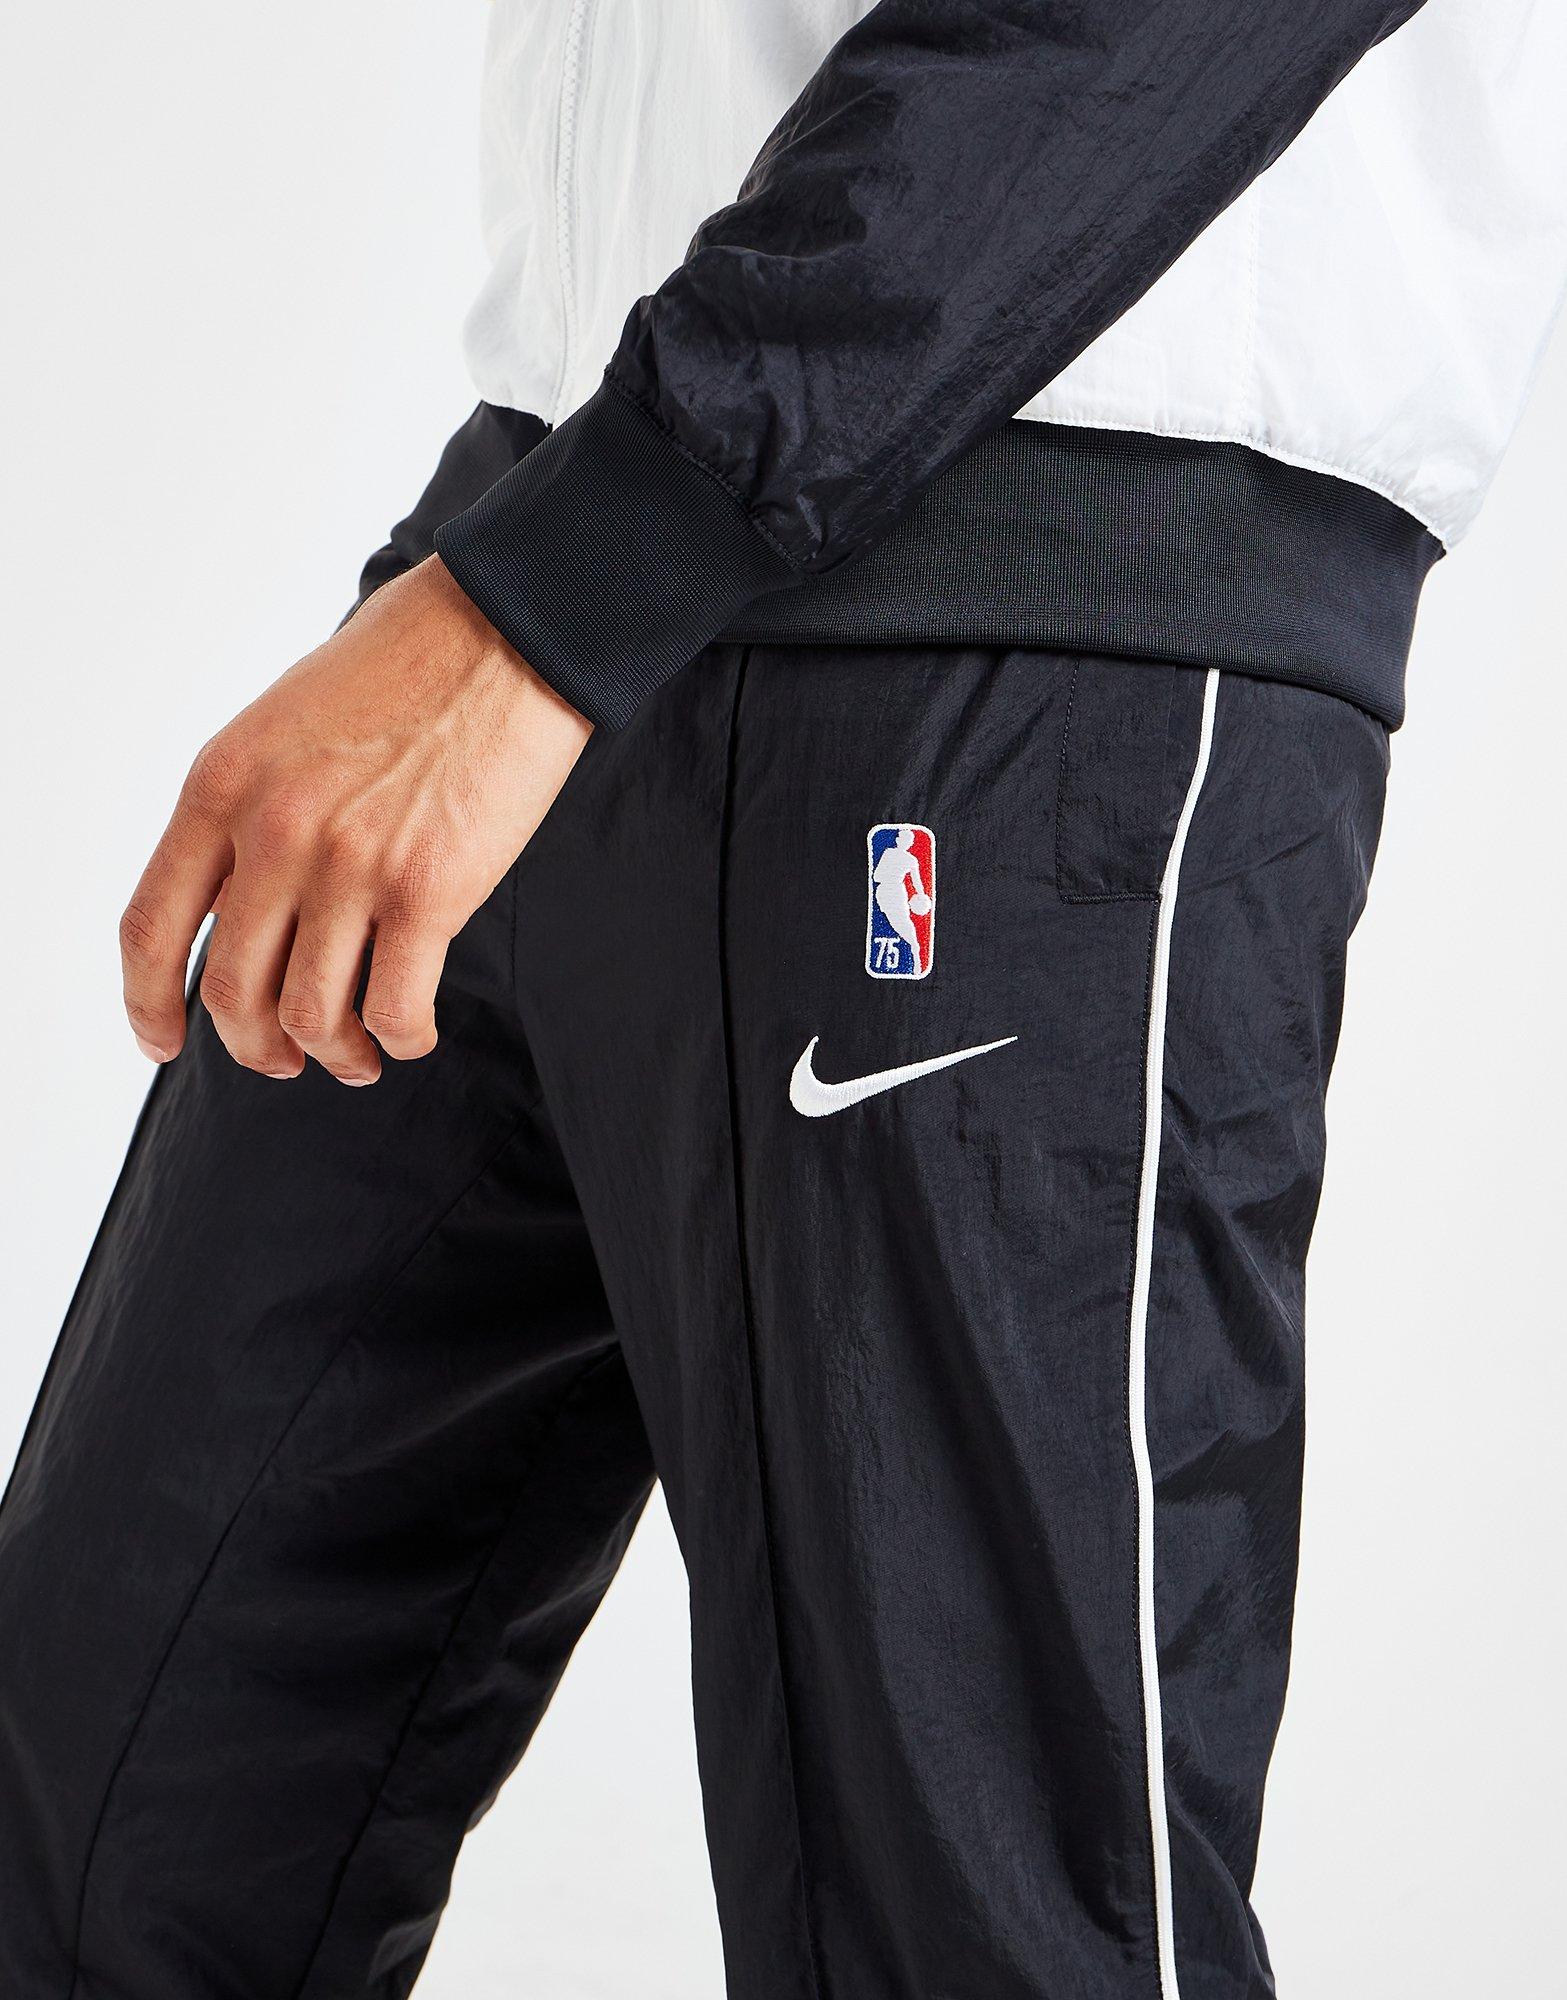 Warm Weather Football Referee Pants New Tapered Fit 1 1/4 White Stripe Officials Choice! Smitty FBS-185 